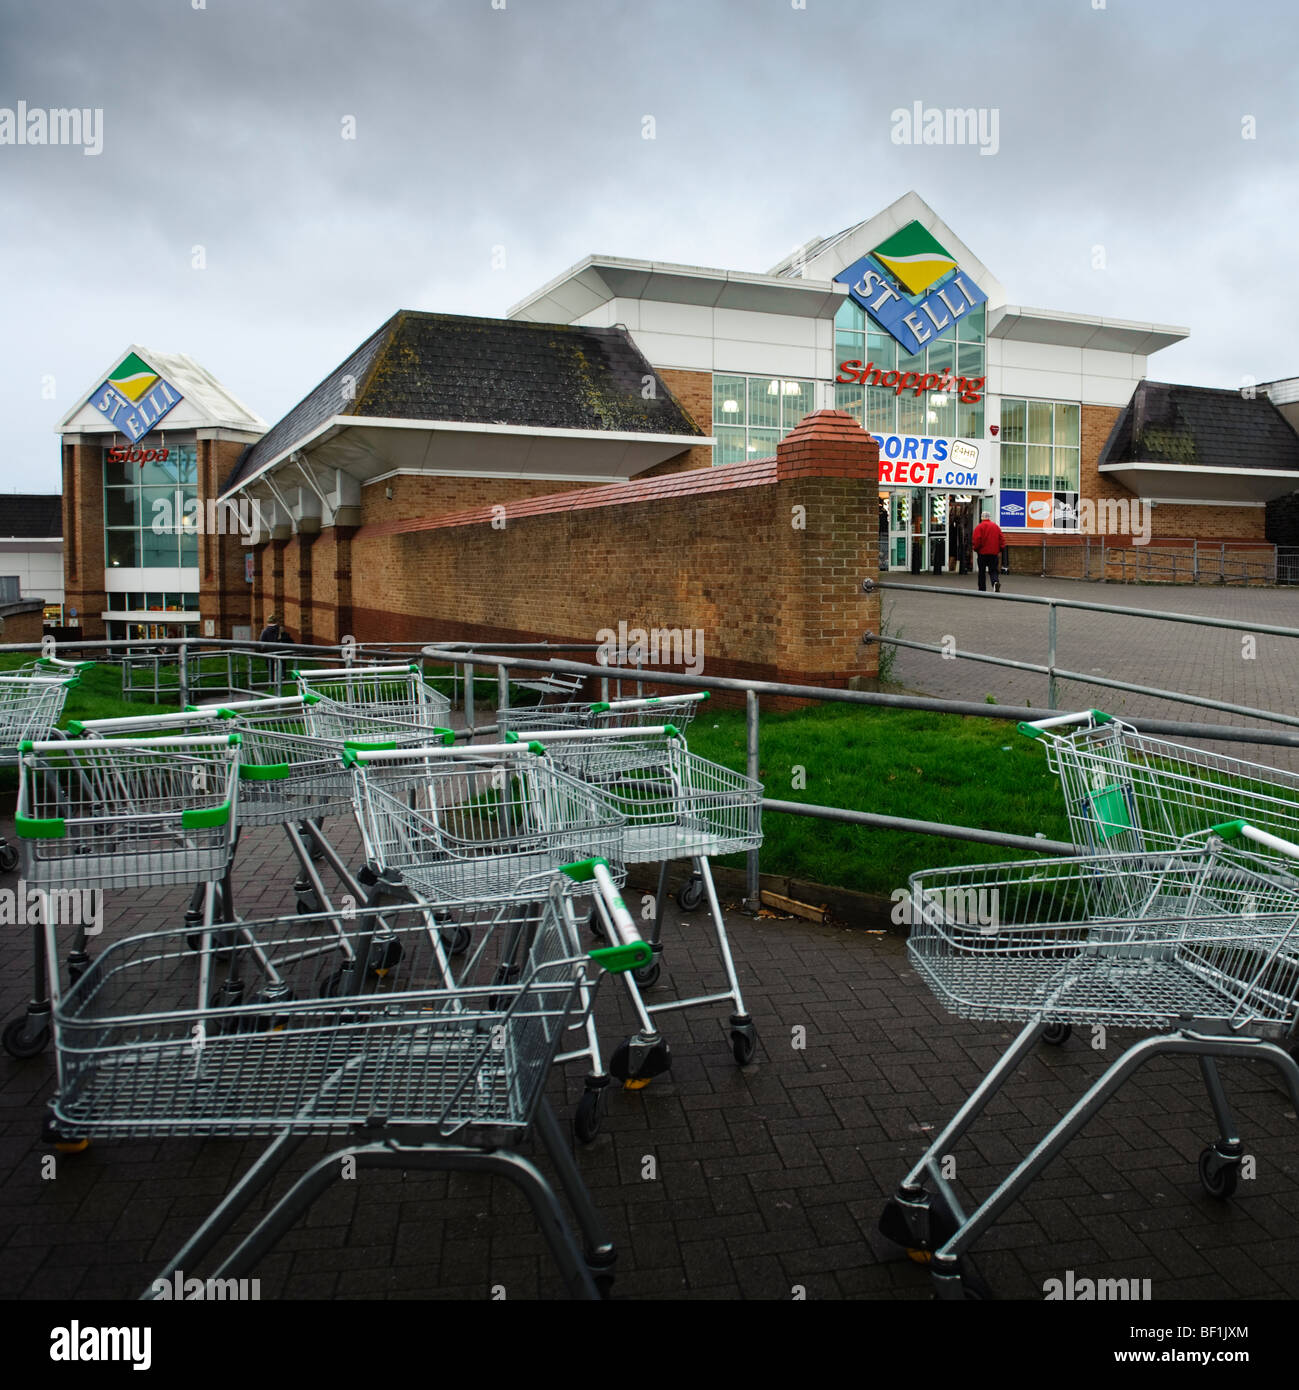 St Elli shopping centre and asda shopping trolleys in Llanelli town centre, Carmarthenshire west wales UK Stock Photo